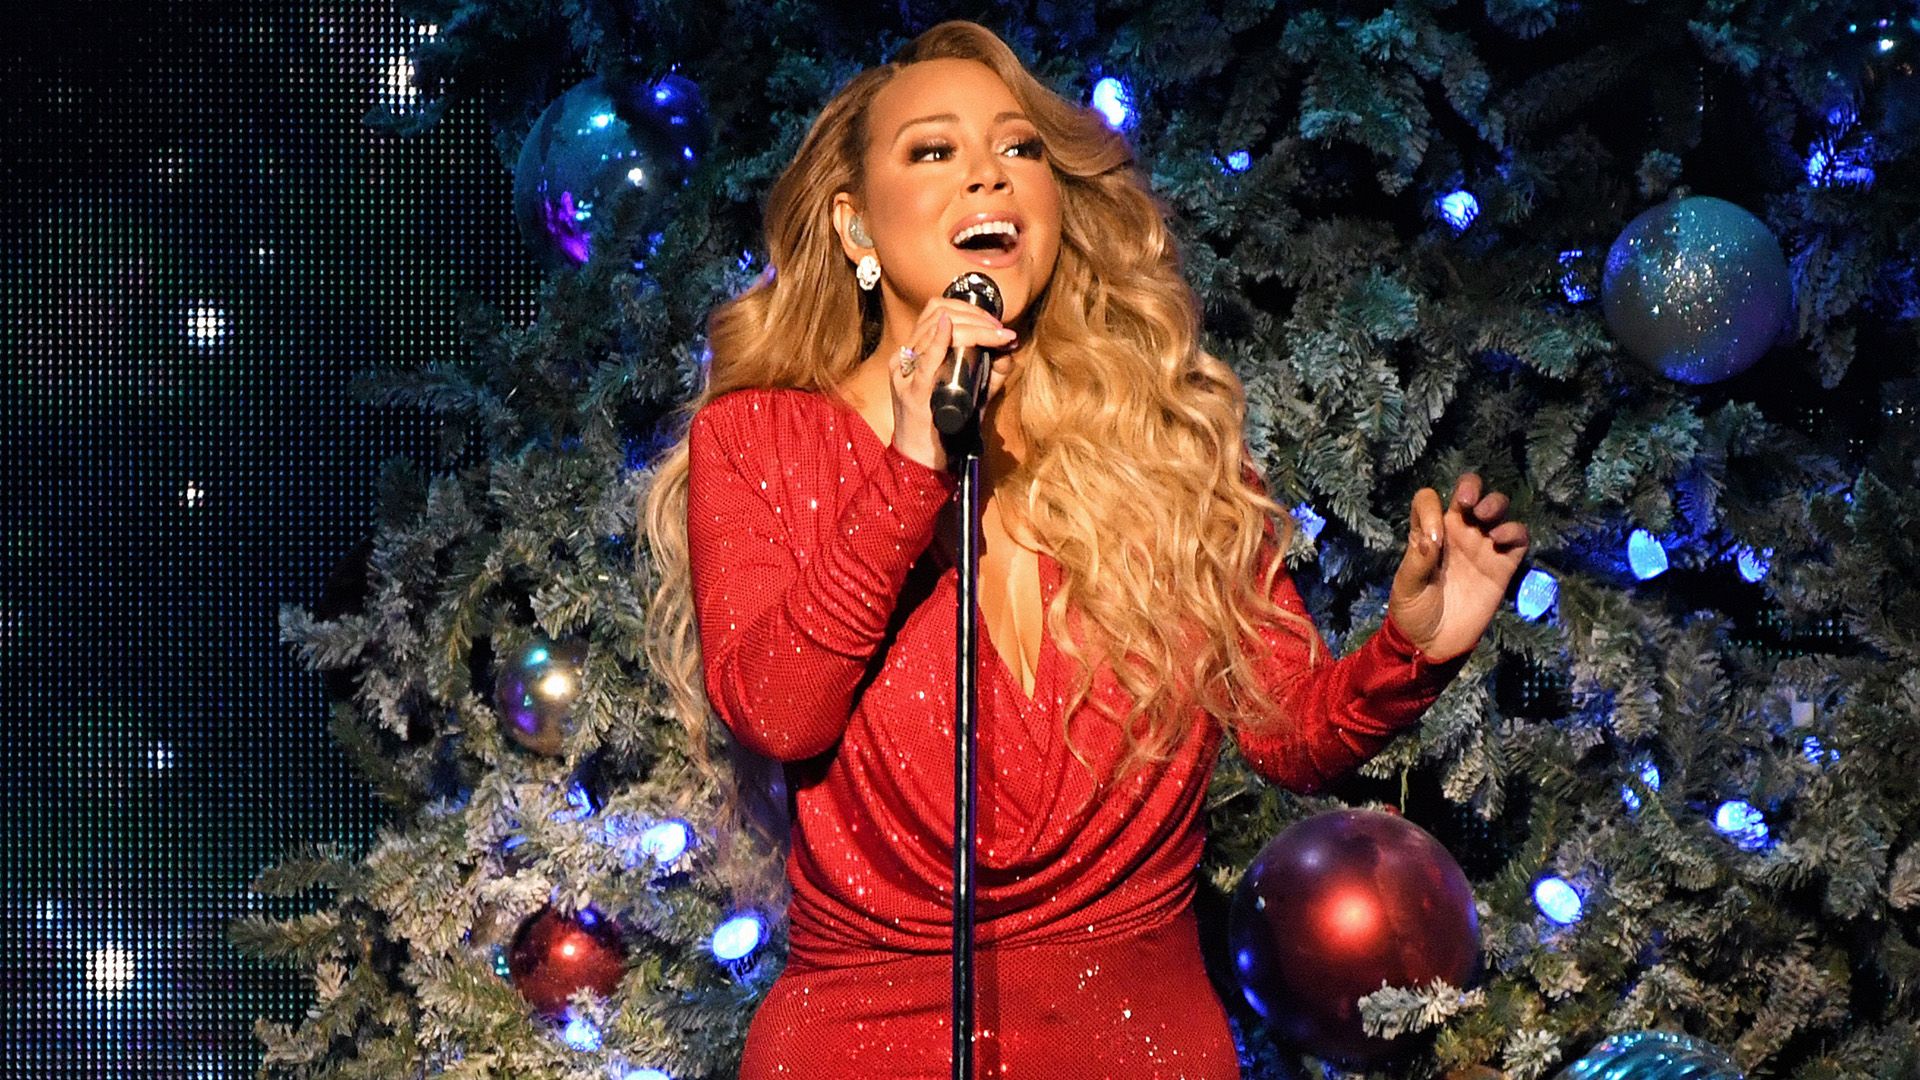 Mariah Carey: Merry Christmas to All! background